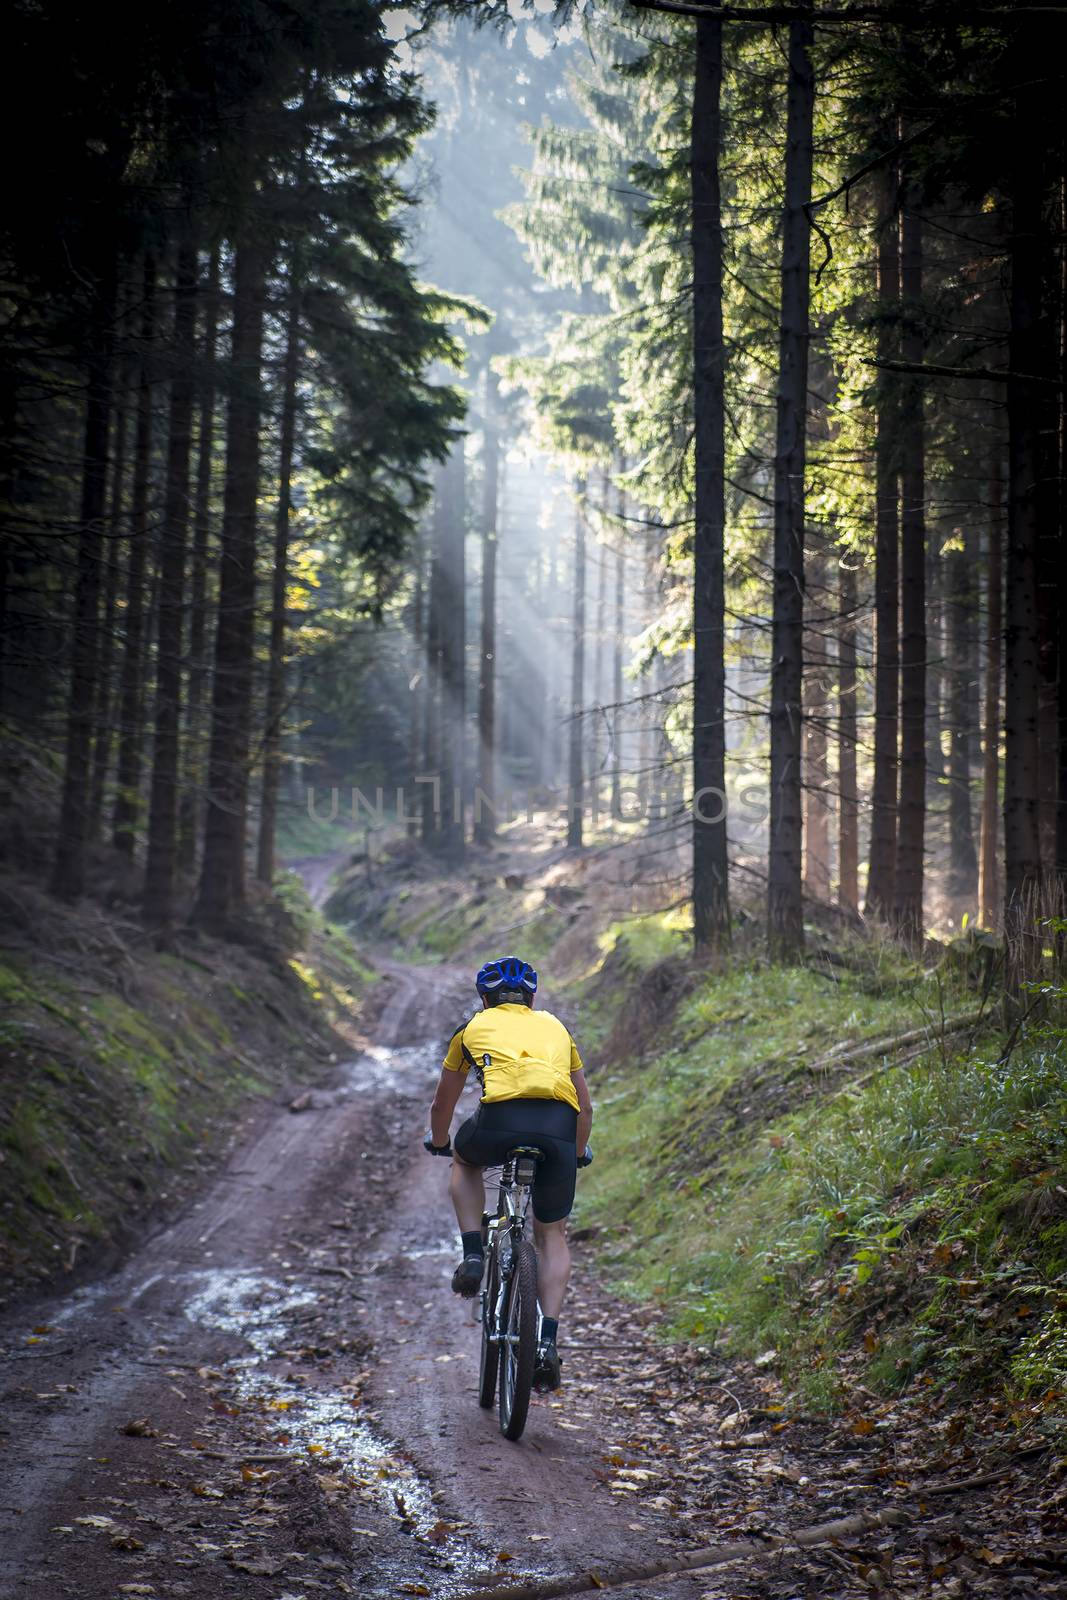 Young biker on muddy road - Sowie mountains, Poland